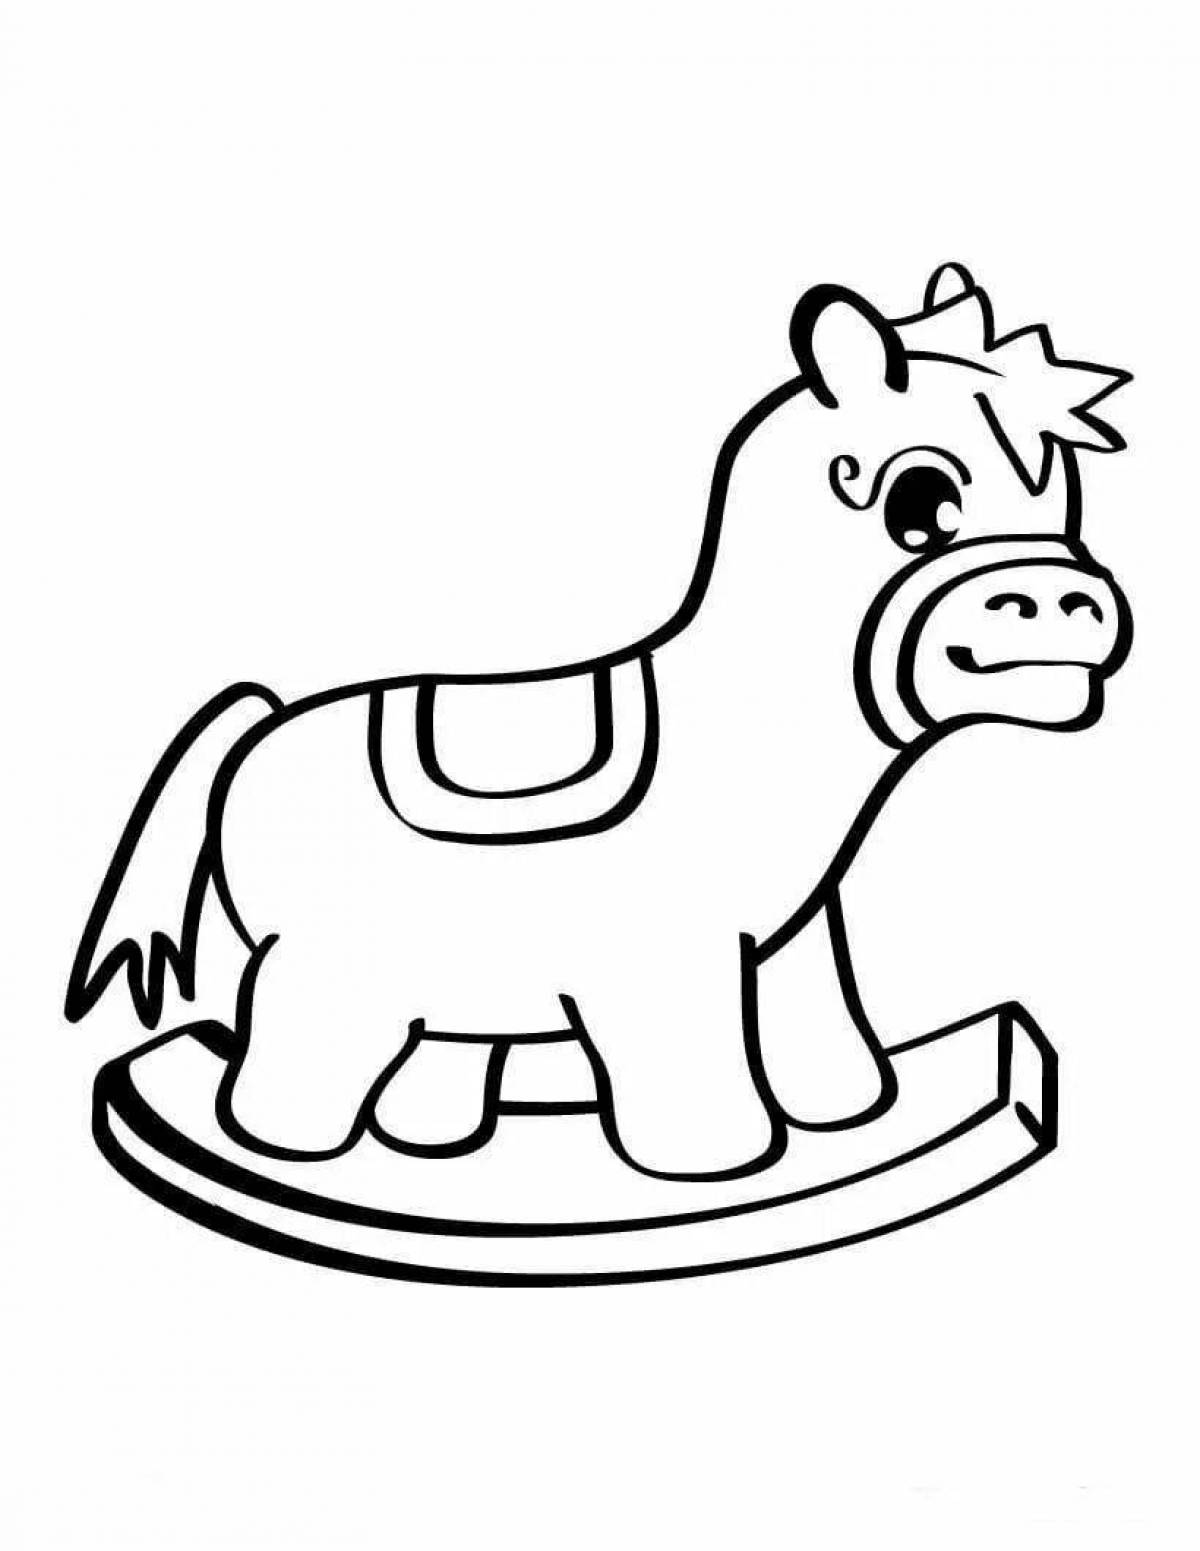 Joyful coloring horse for children 2-3 years old